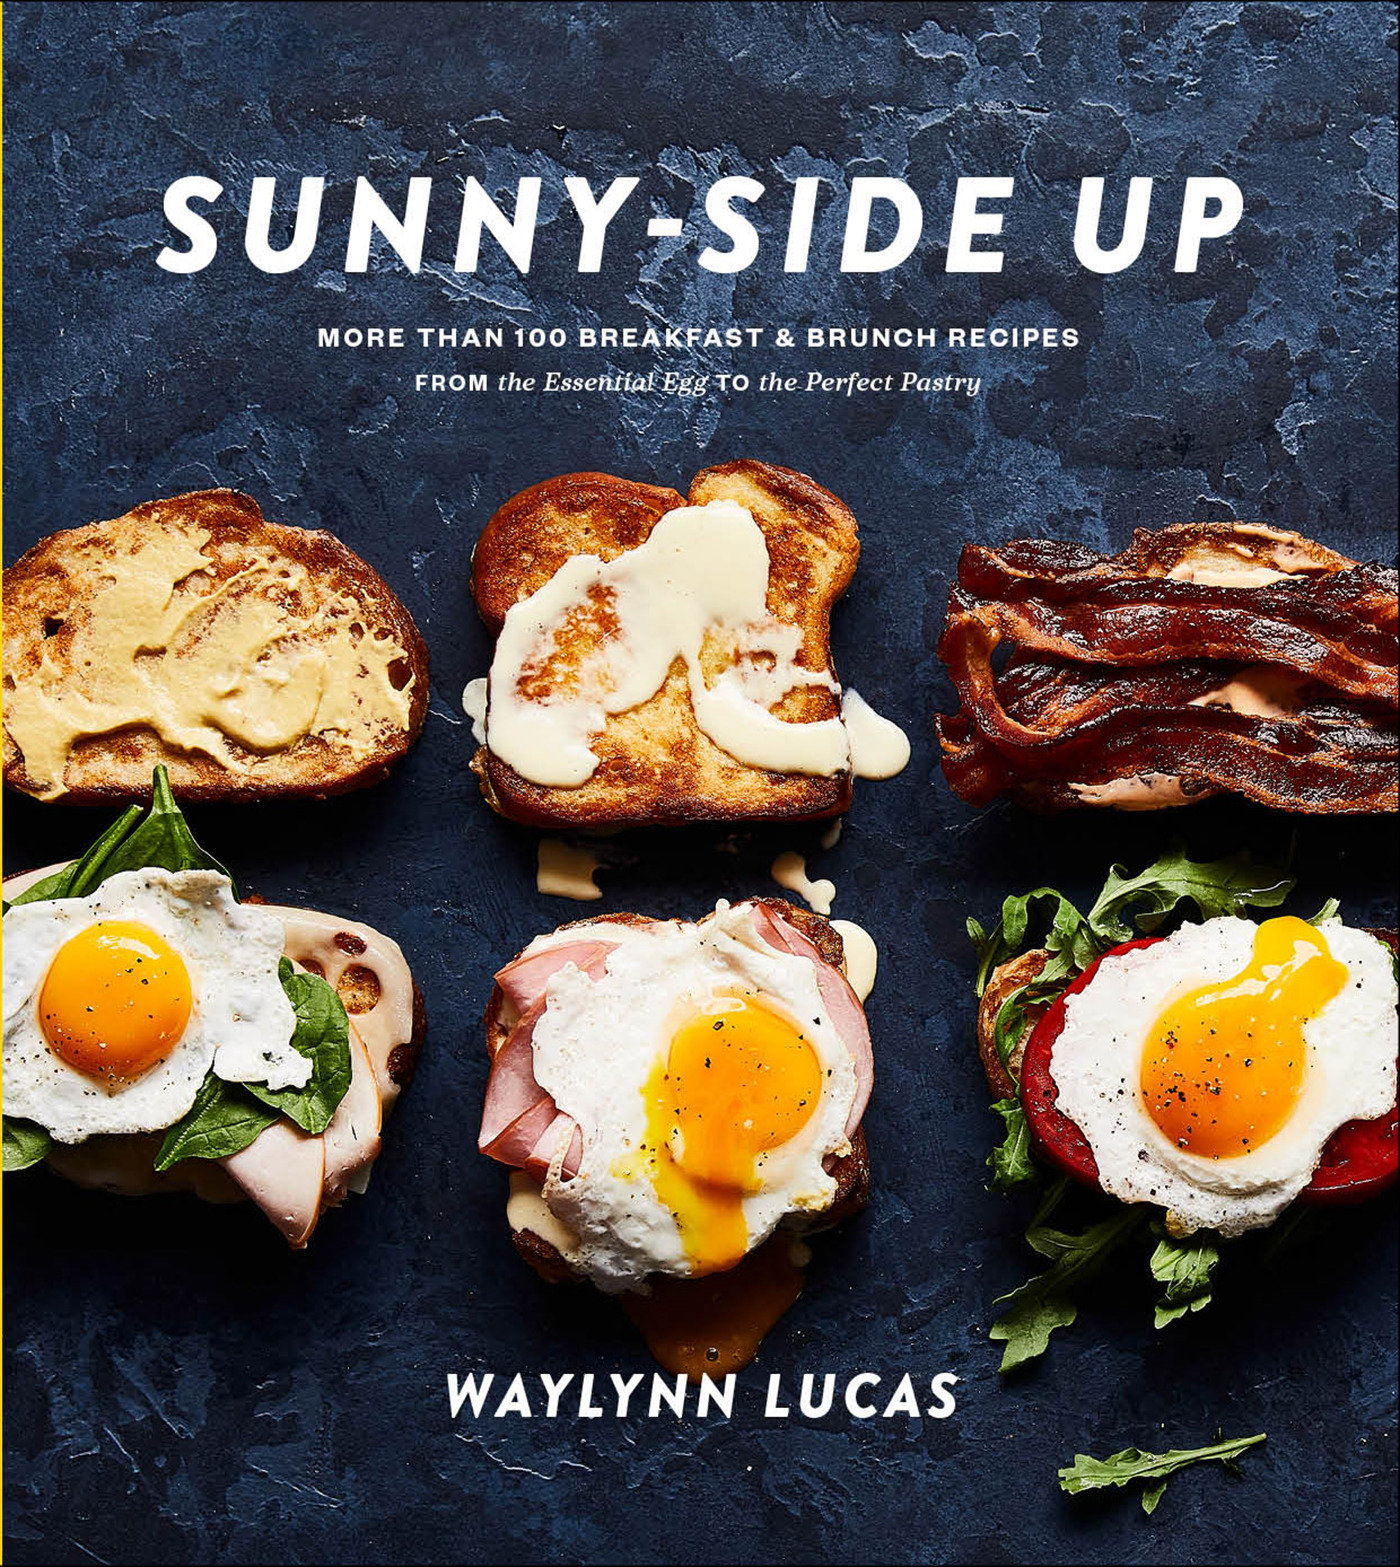 Sunny-Side Up (Hardcover Book)